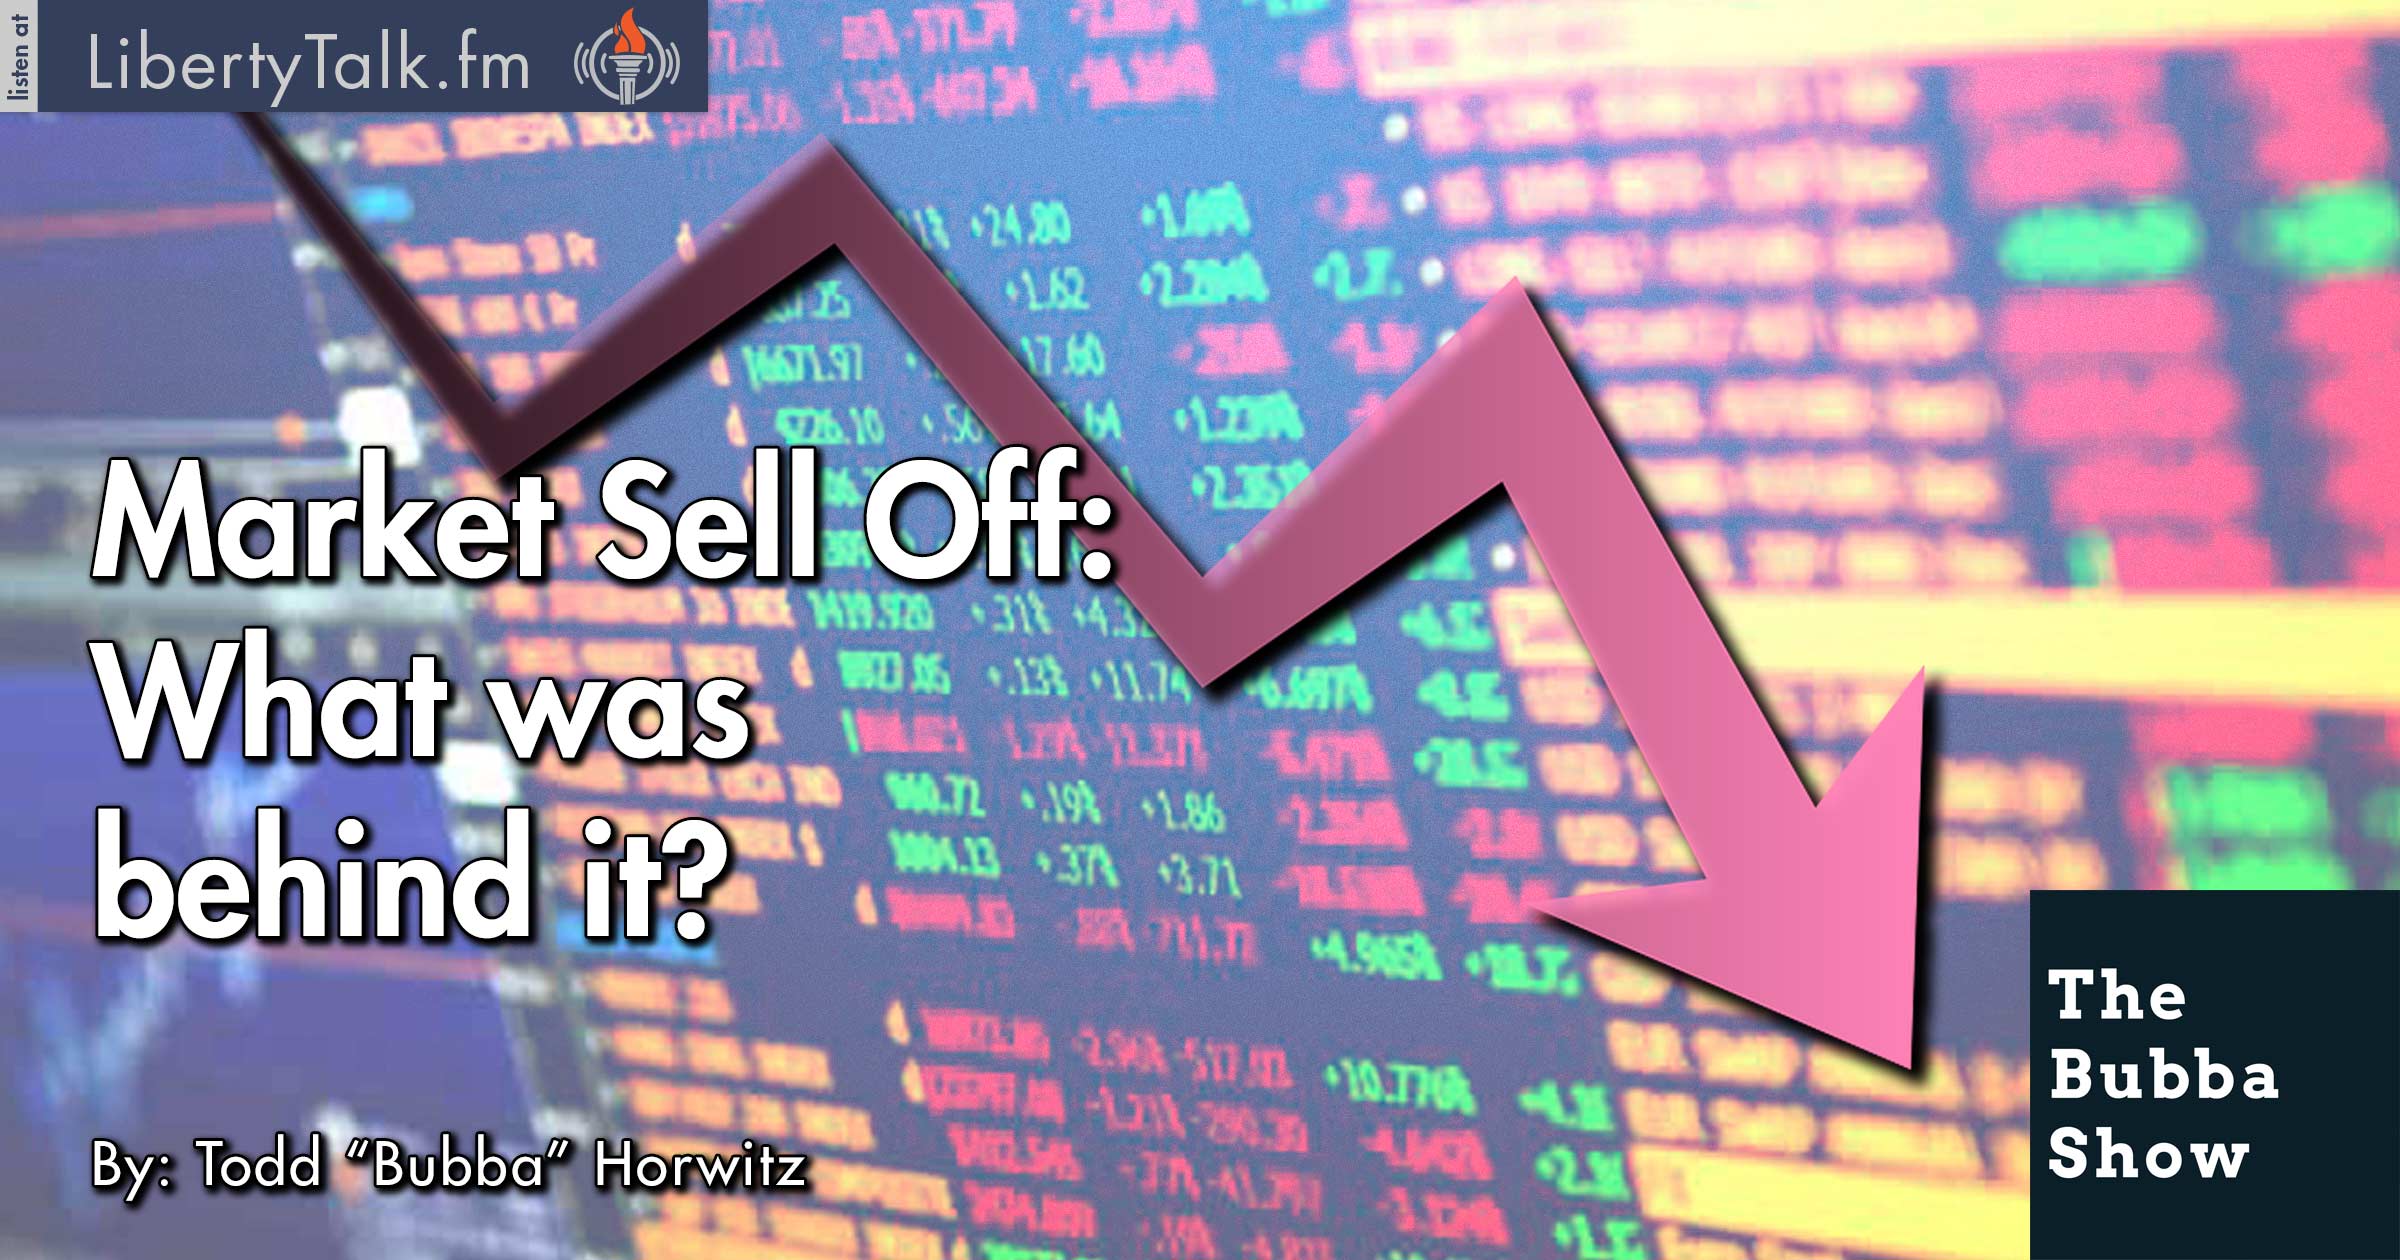 Market Sell Off: What was behind it? - The Bubba Show